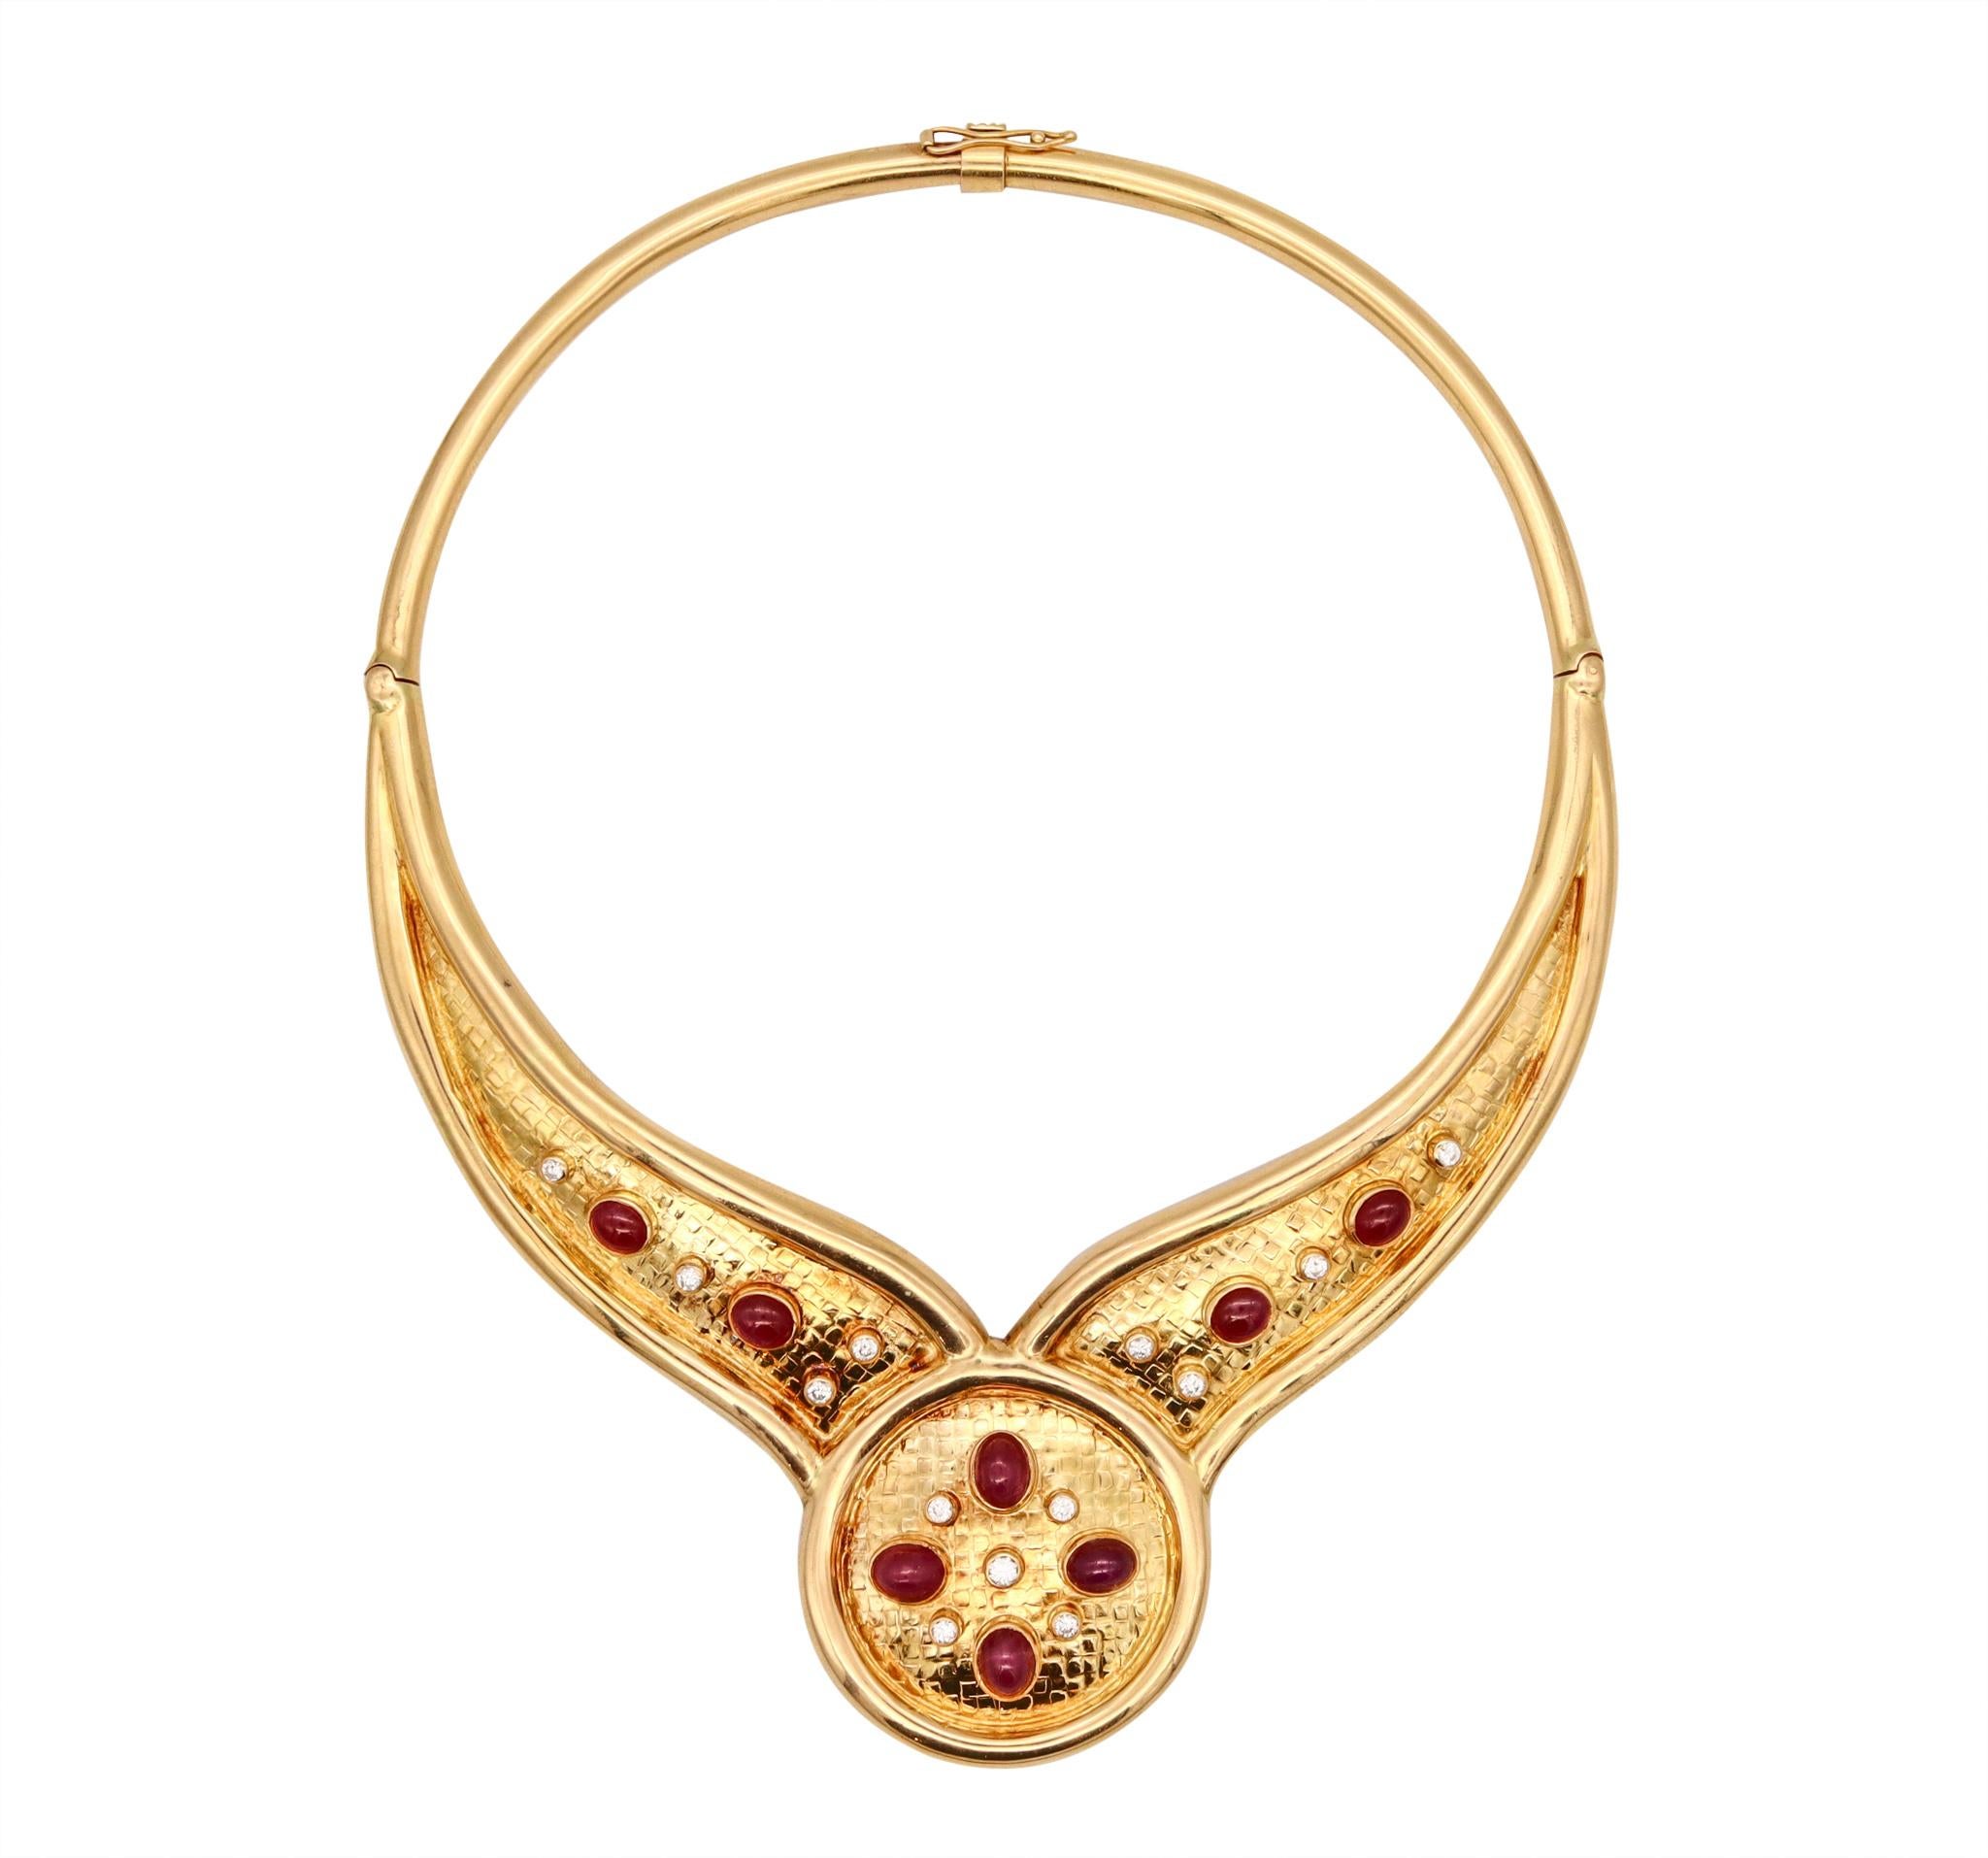 Lalaounis Greece Choker Necklace 18Kt Yellow Gold With 16.67 Cts Diamonds Rubies 2